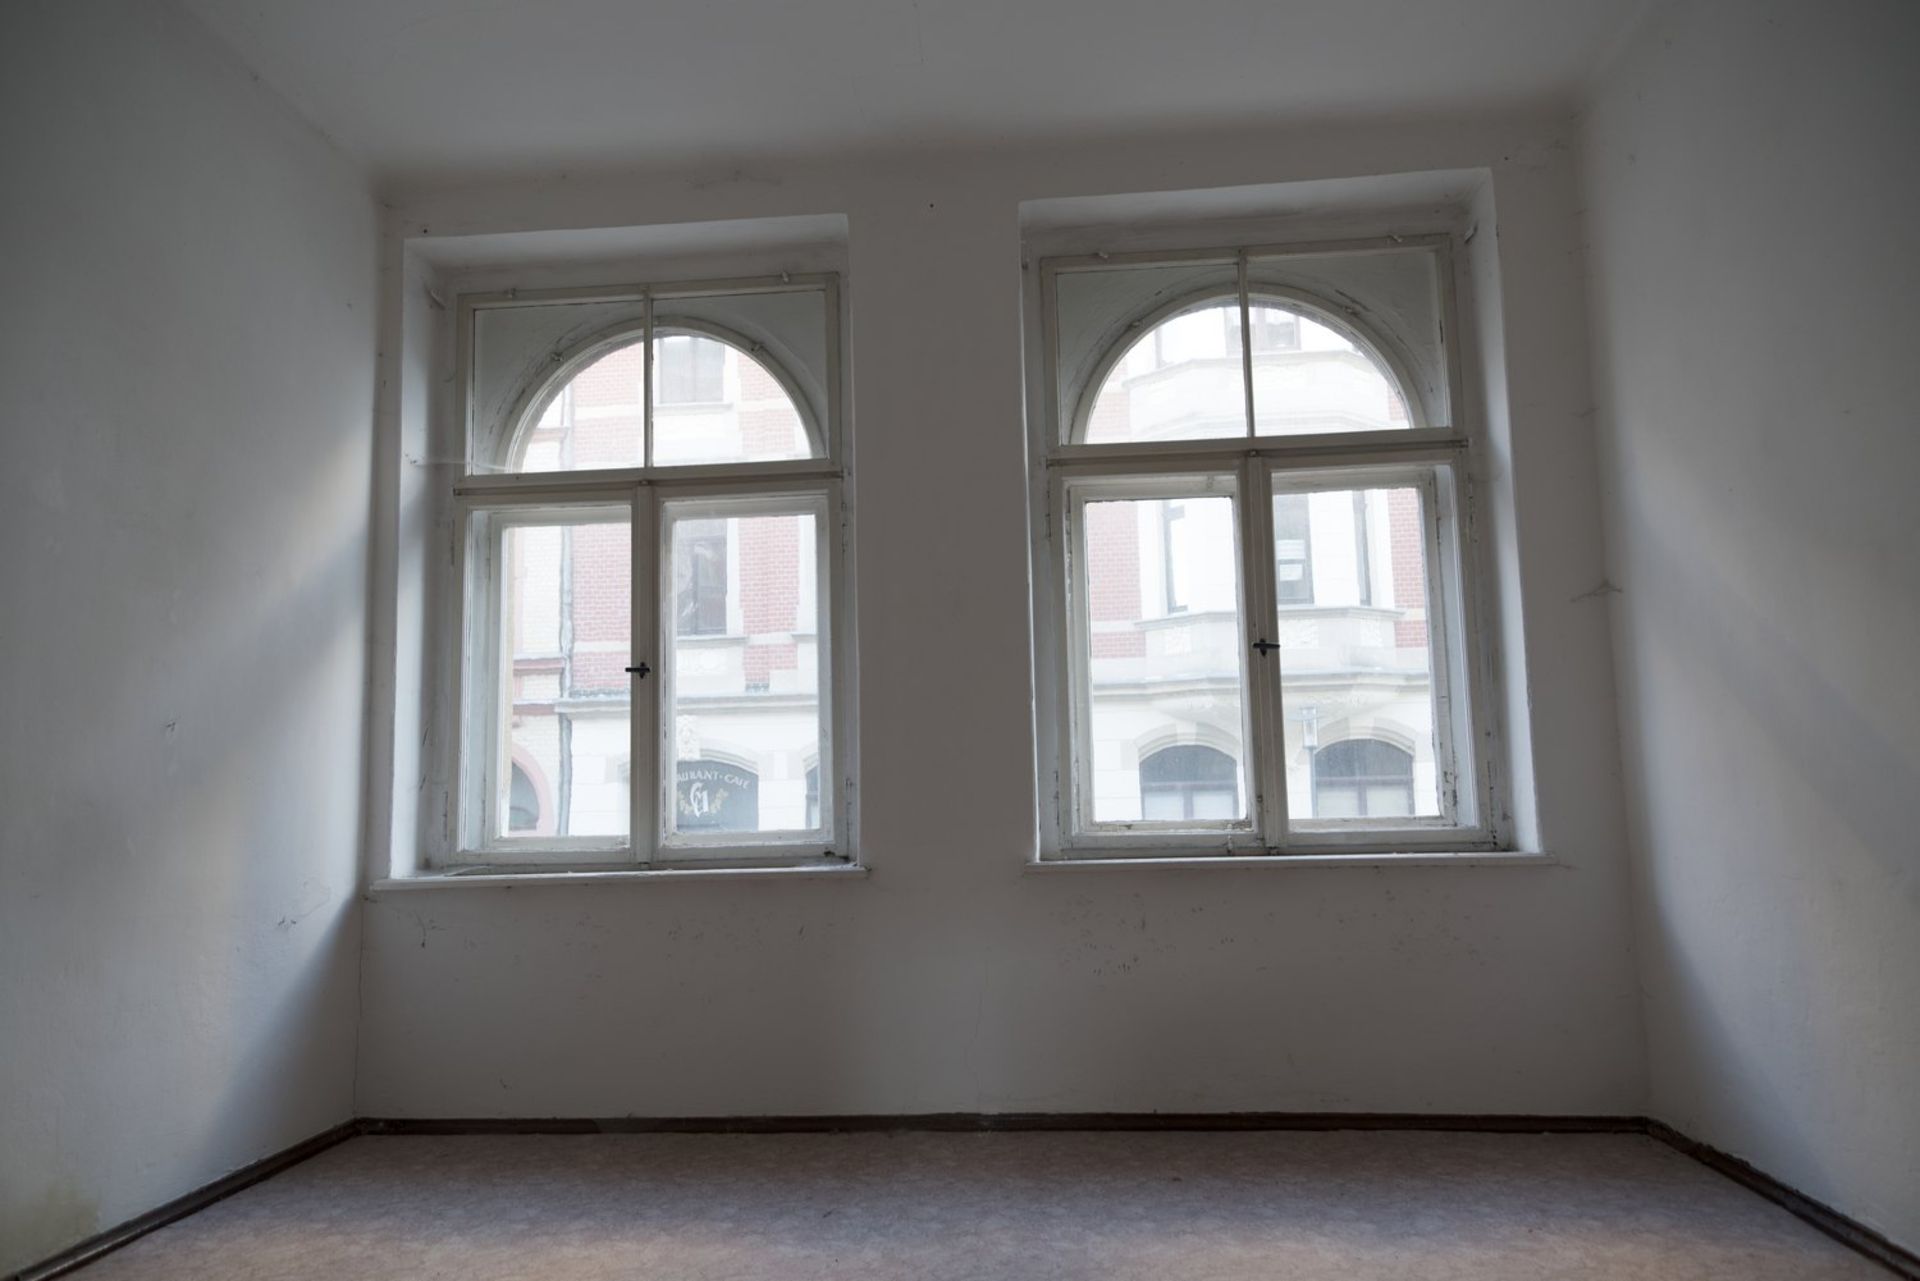 4 STOREY GERMANY APARTMENT BLOCK IN ADDITION TO A FULL BASEMENT + HUGE ATTIC! - Image 13 of 76